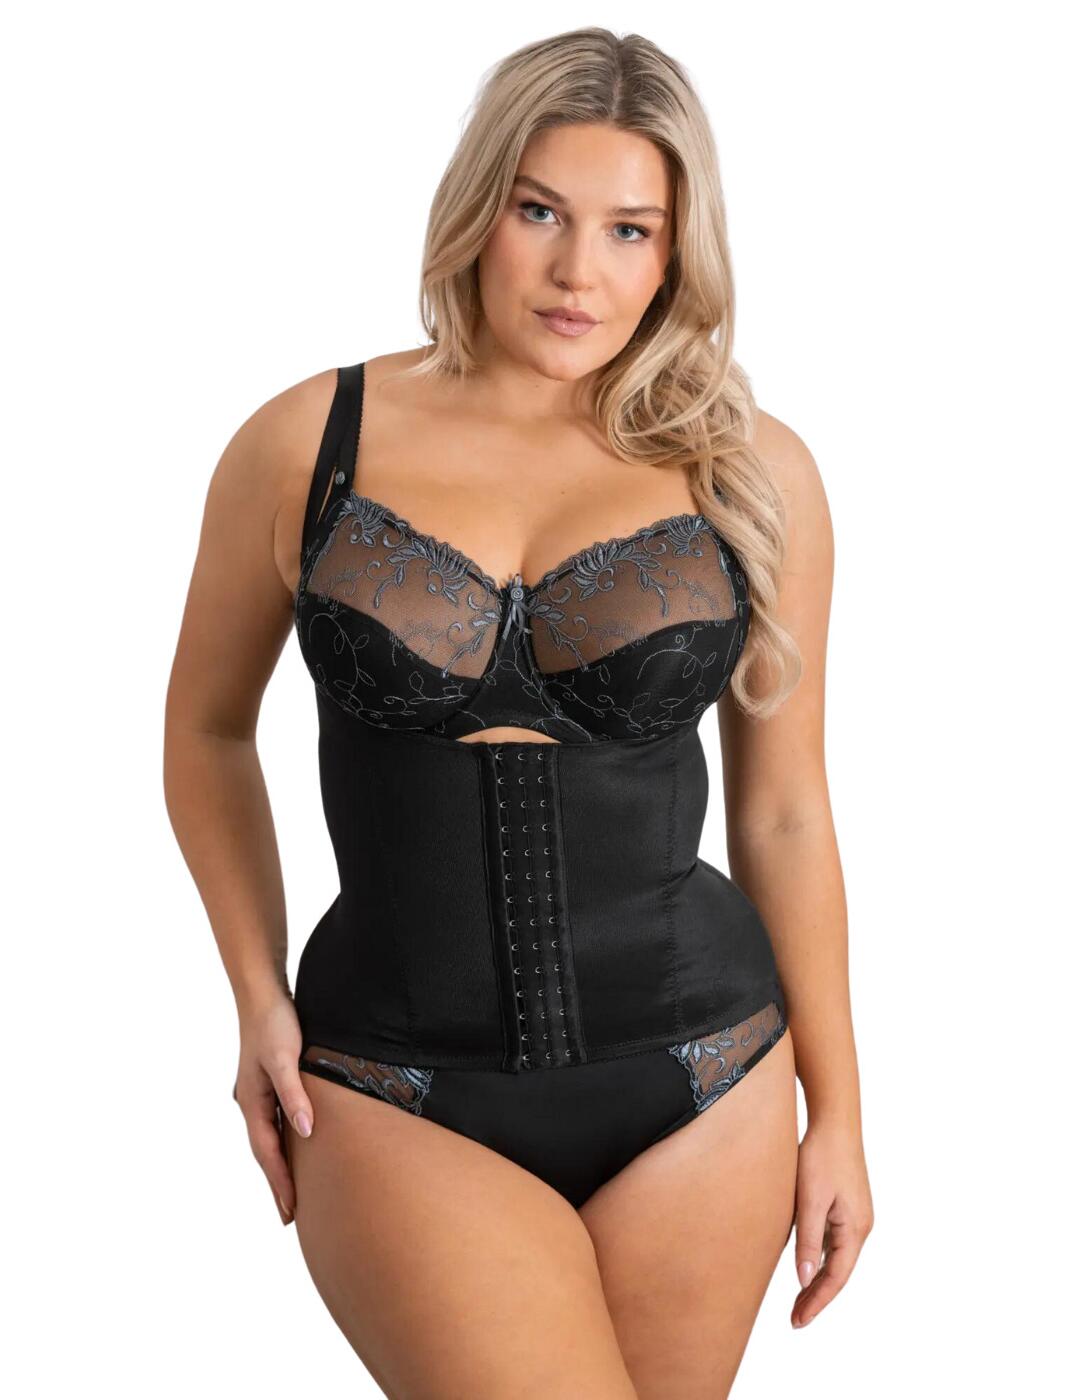 Pour Moi Hourglass Firm Control Back Smoothing Waist Cincher Black